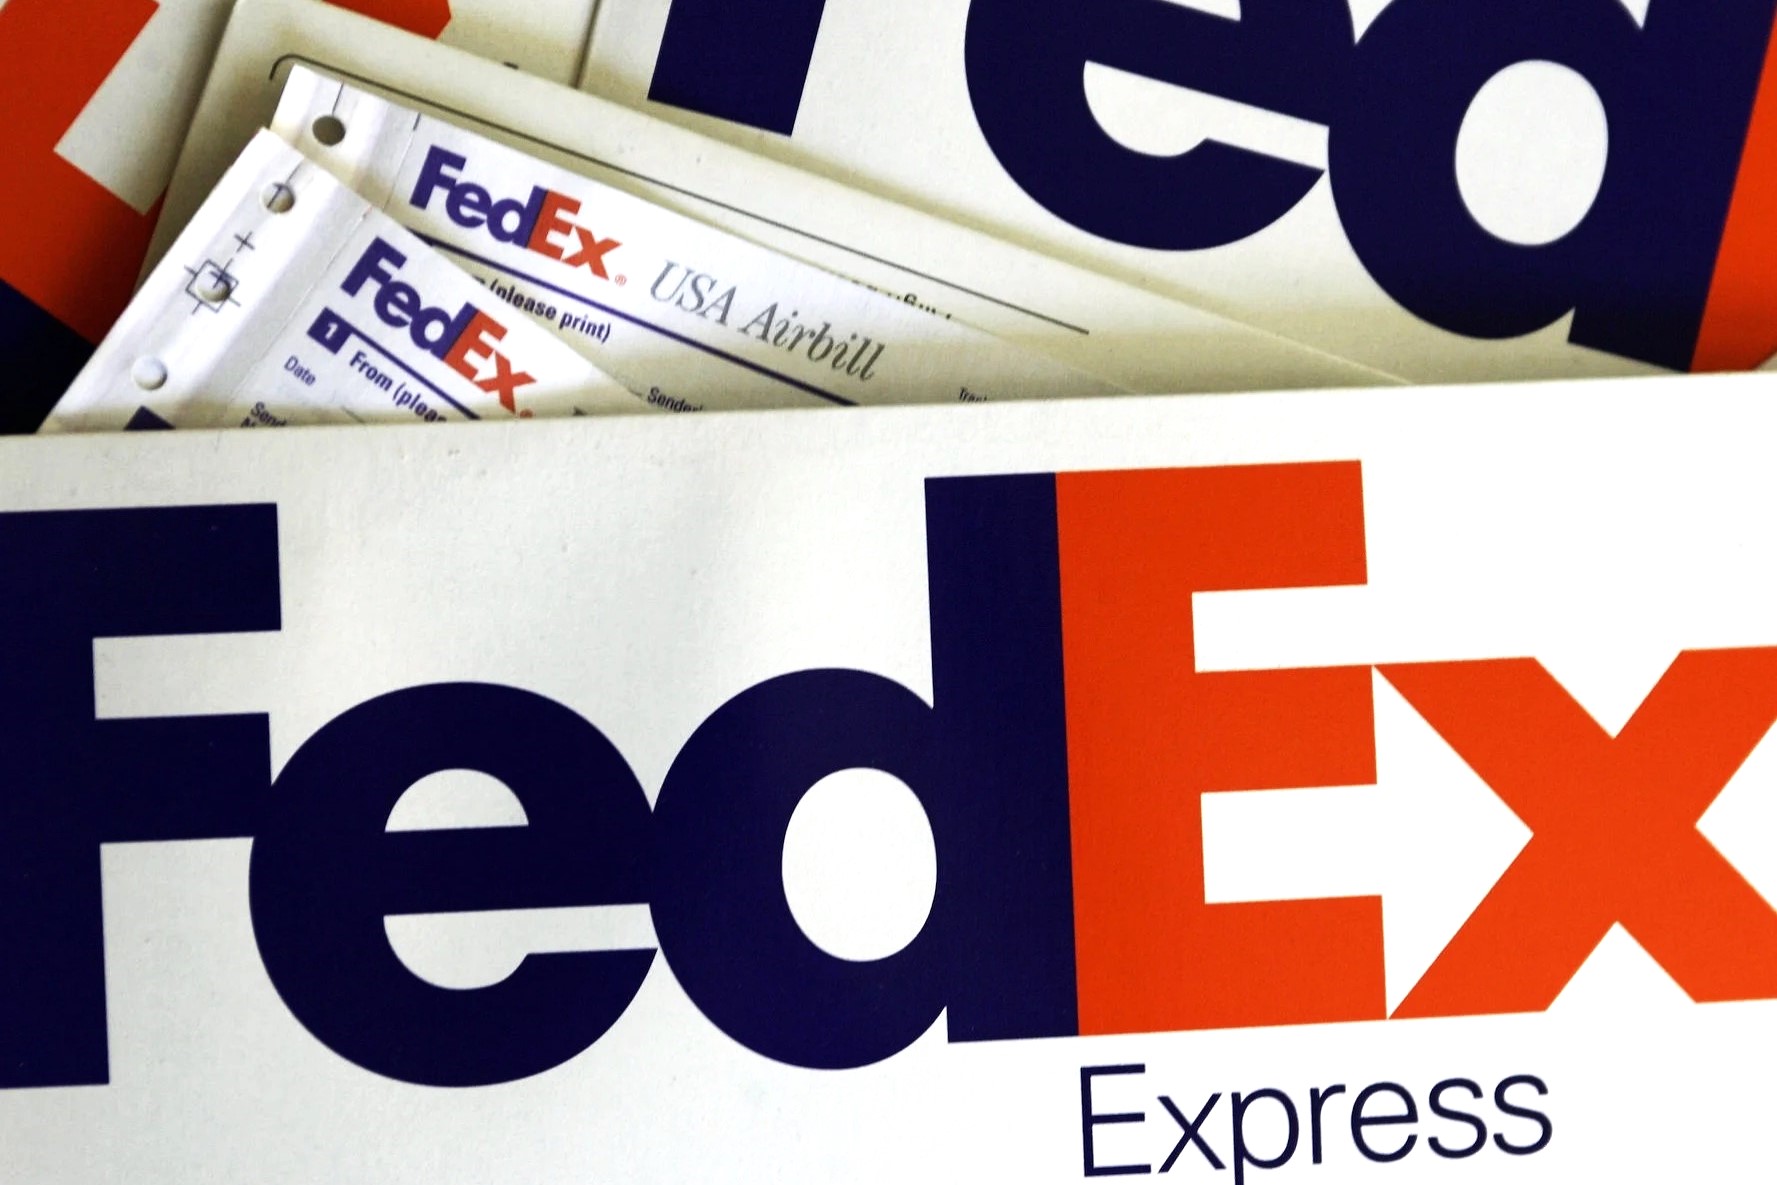 FedEx’s Release Authorized: Everything You Need To Know